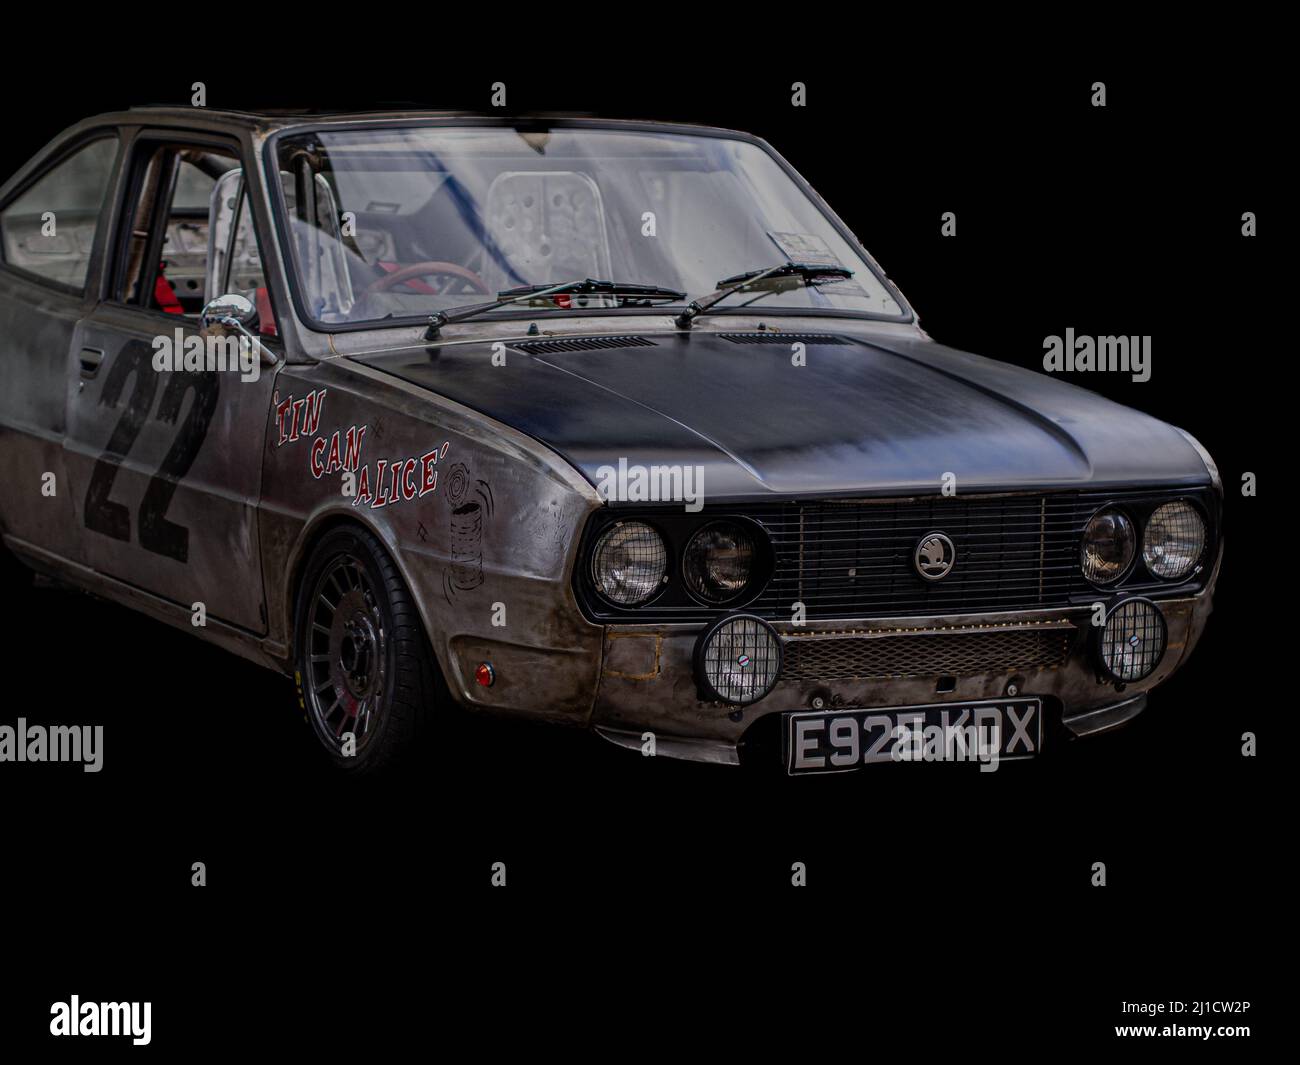 Retro racing car in the black background Stock Photo